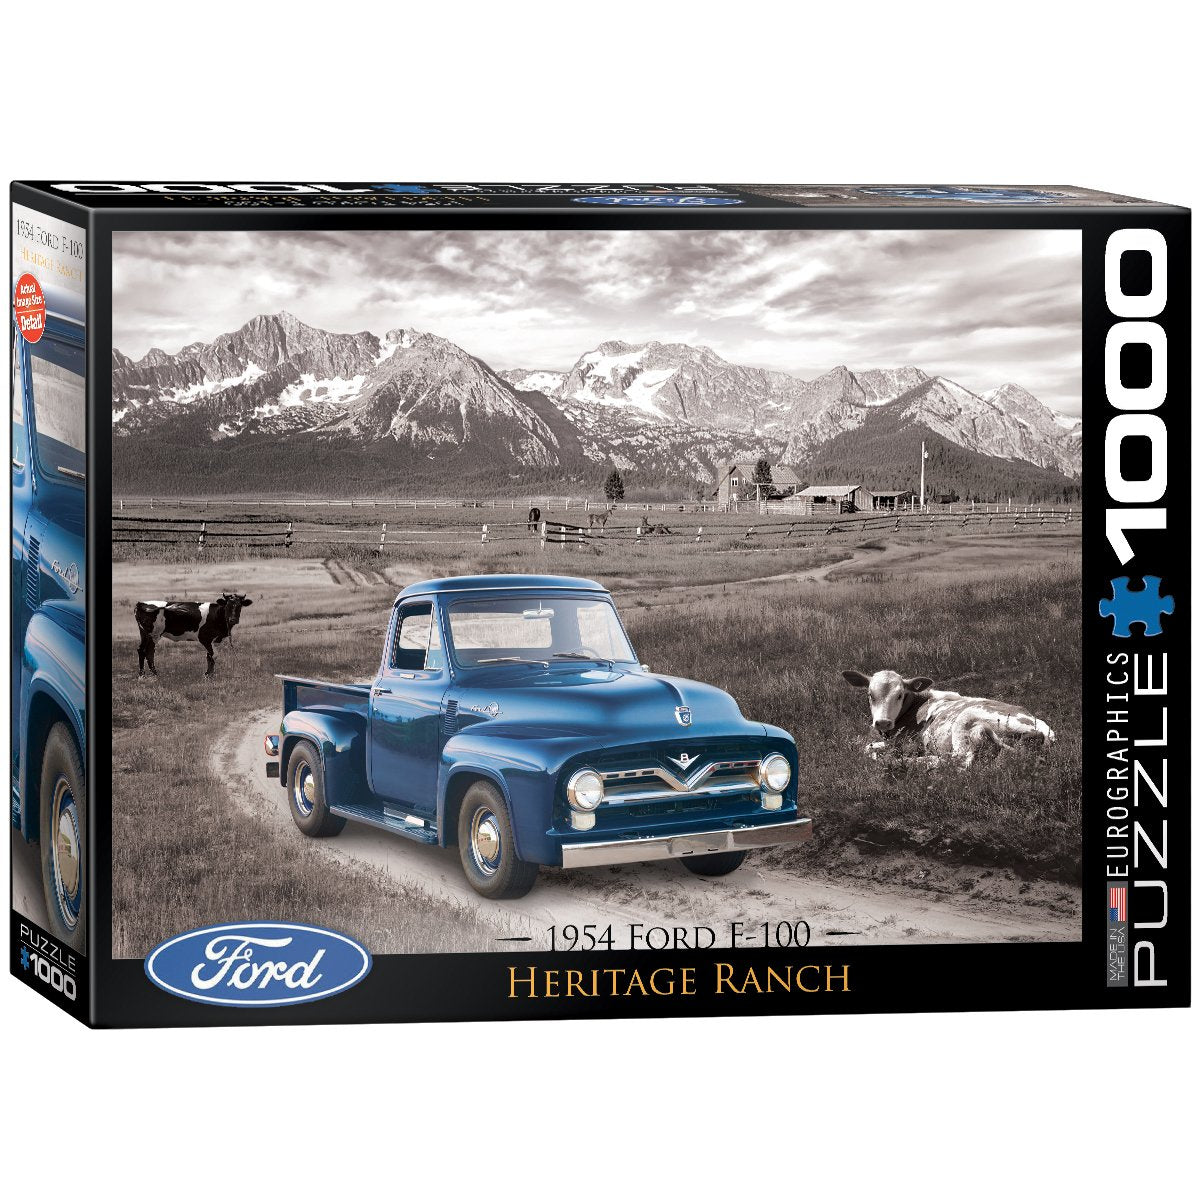 EuroGraphics 1954 Ford F-100 Puzzle (1000-Piece)